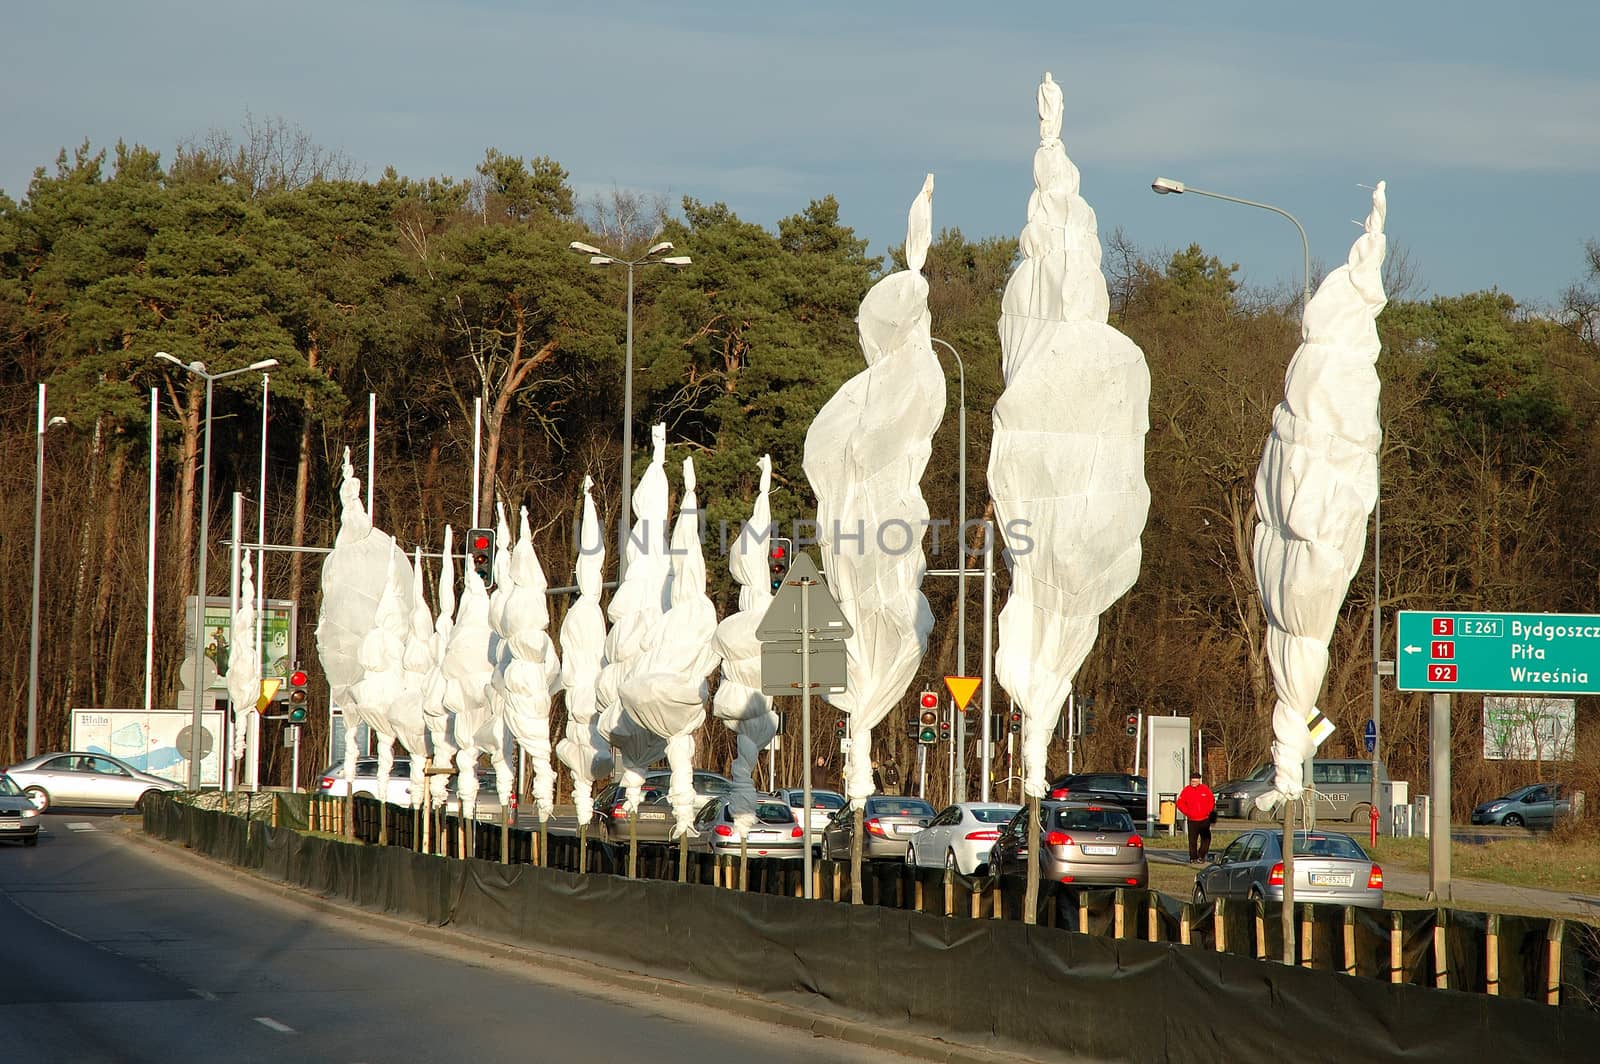 POZNAN, POLAND - JANUARY 12: Trees covered for winter with some protective material on street in Poznan, Poland 12.01.2014